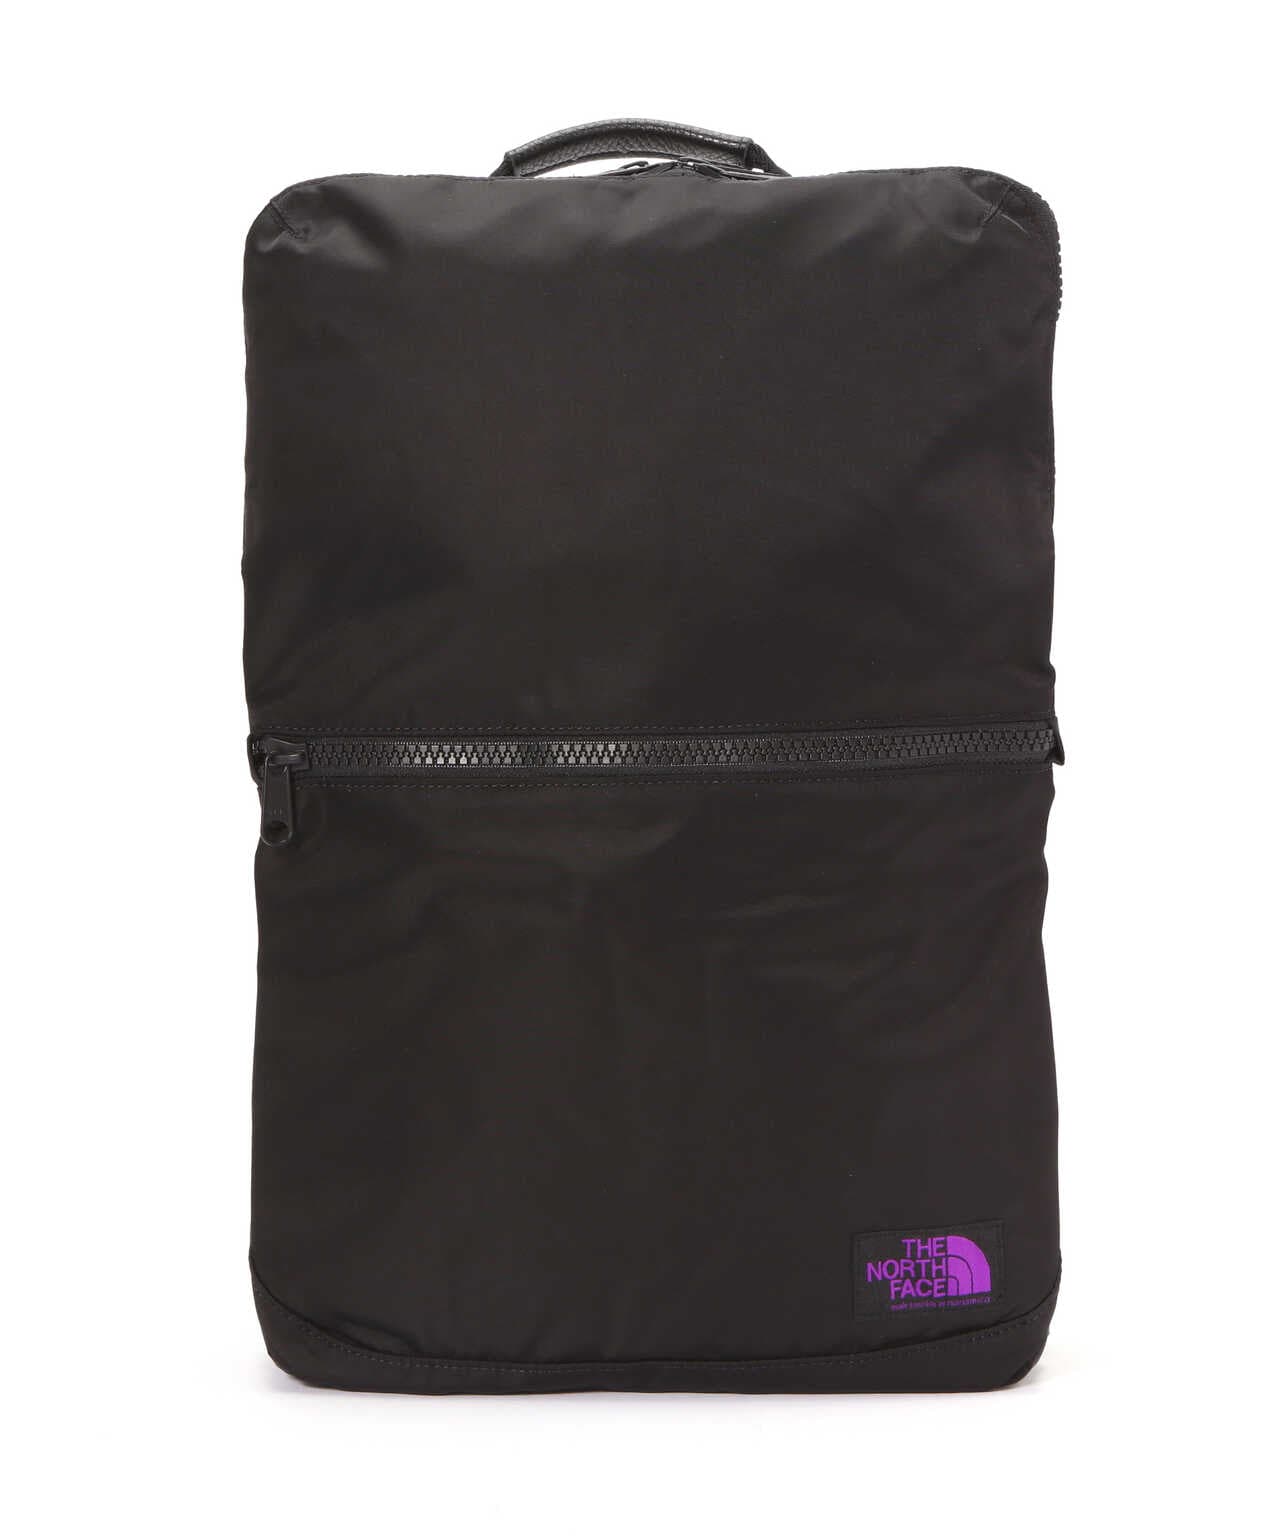 THE NORTH FACE PURPLE LABEL NylonDayPack